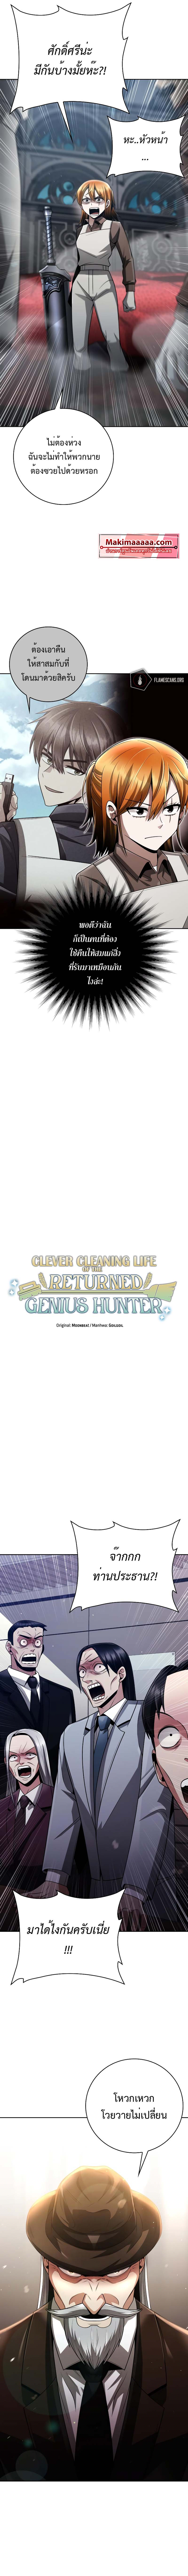 Clever Cleaning Life of the Returned Genius Hunter 42 Makimaaaaa.com 02